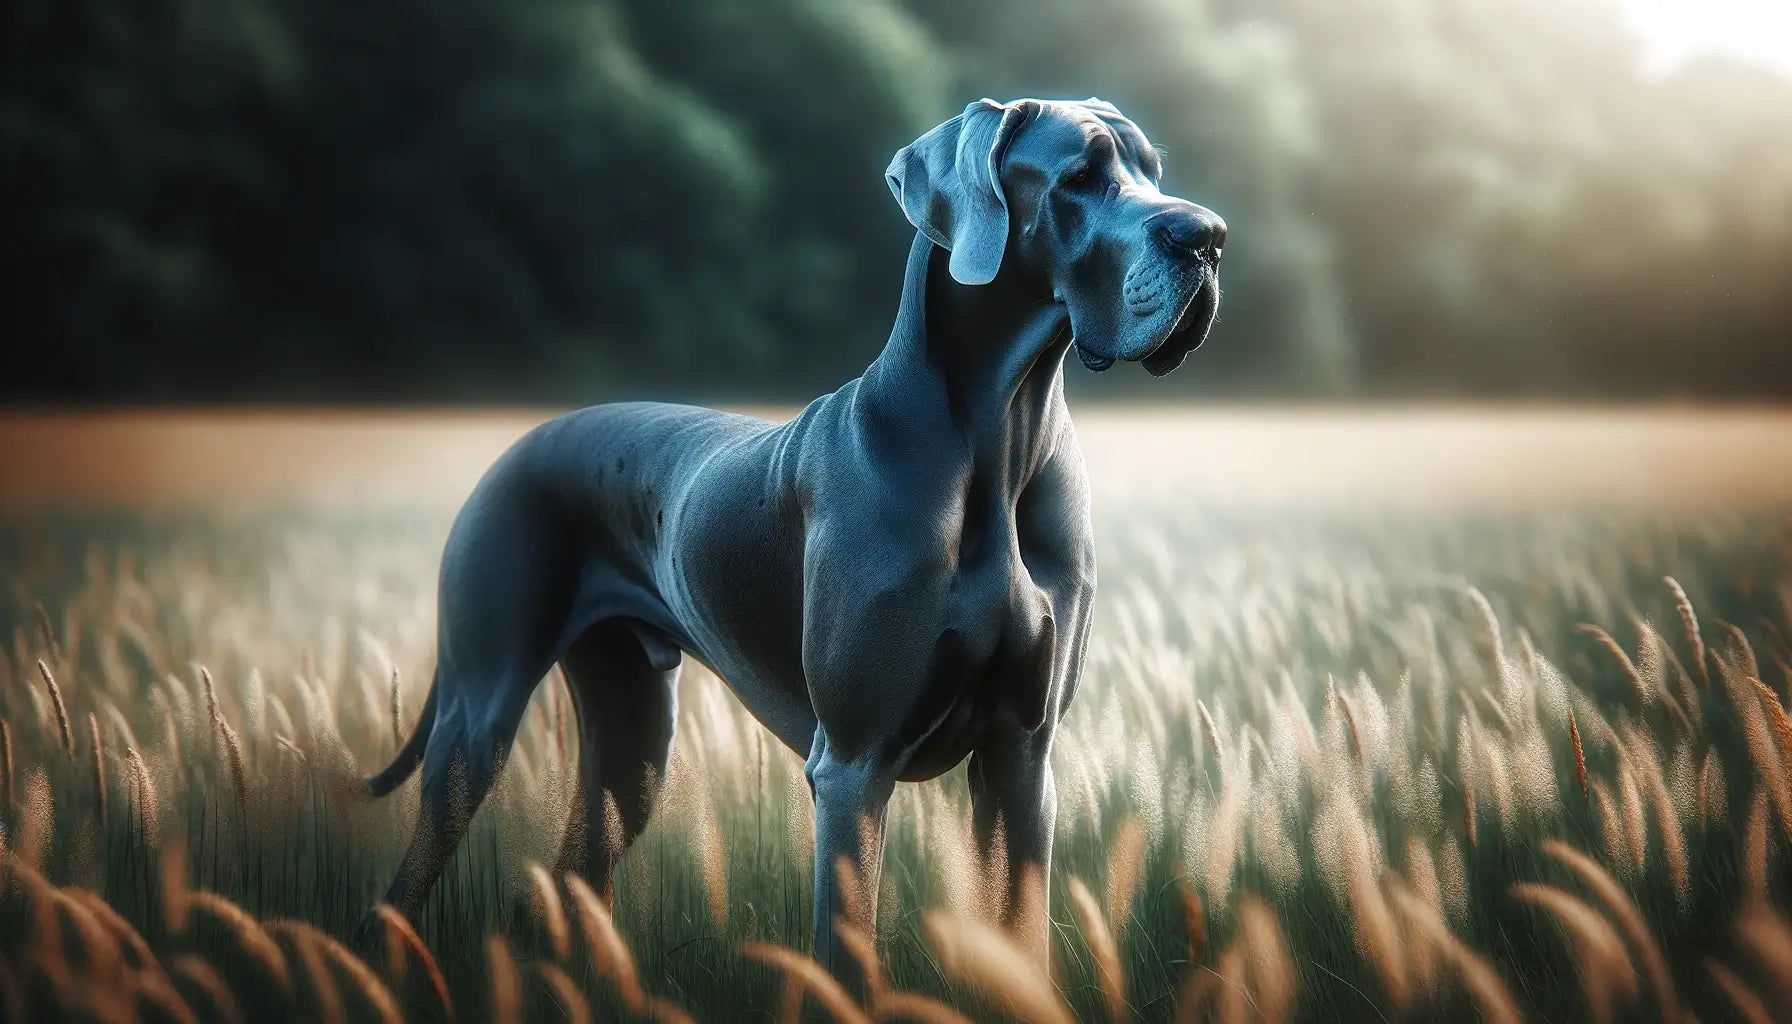 Blue Great Dane in a grassy field, its long sleek blue coat and distinctive features differentiating it from other breeds.